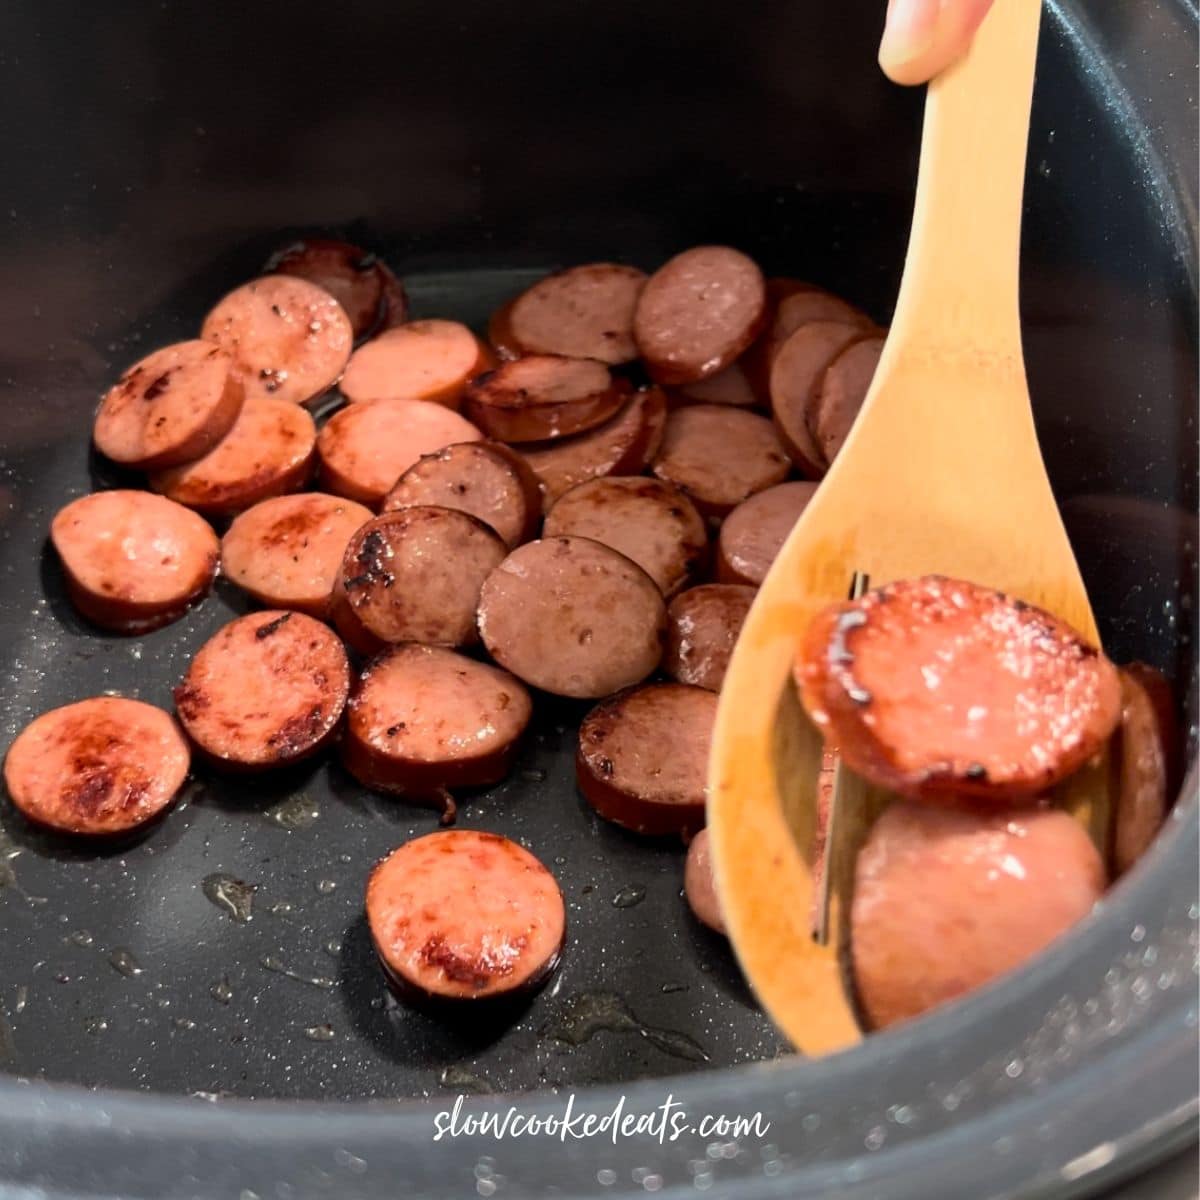 Removing the andouille sausage from the crockpot.